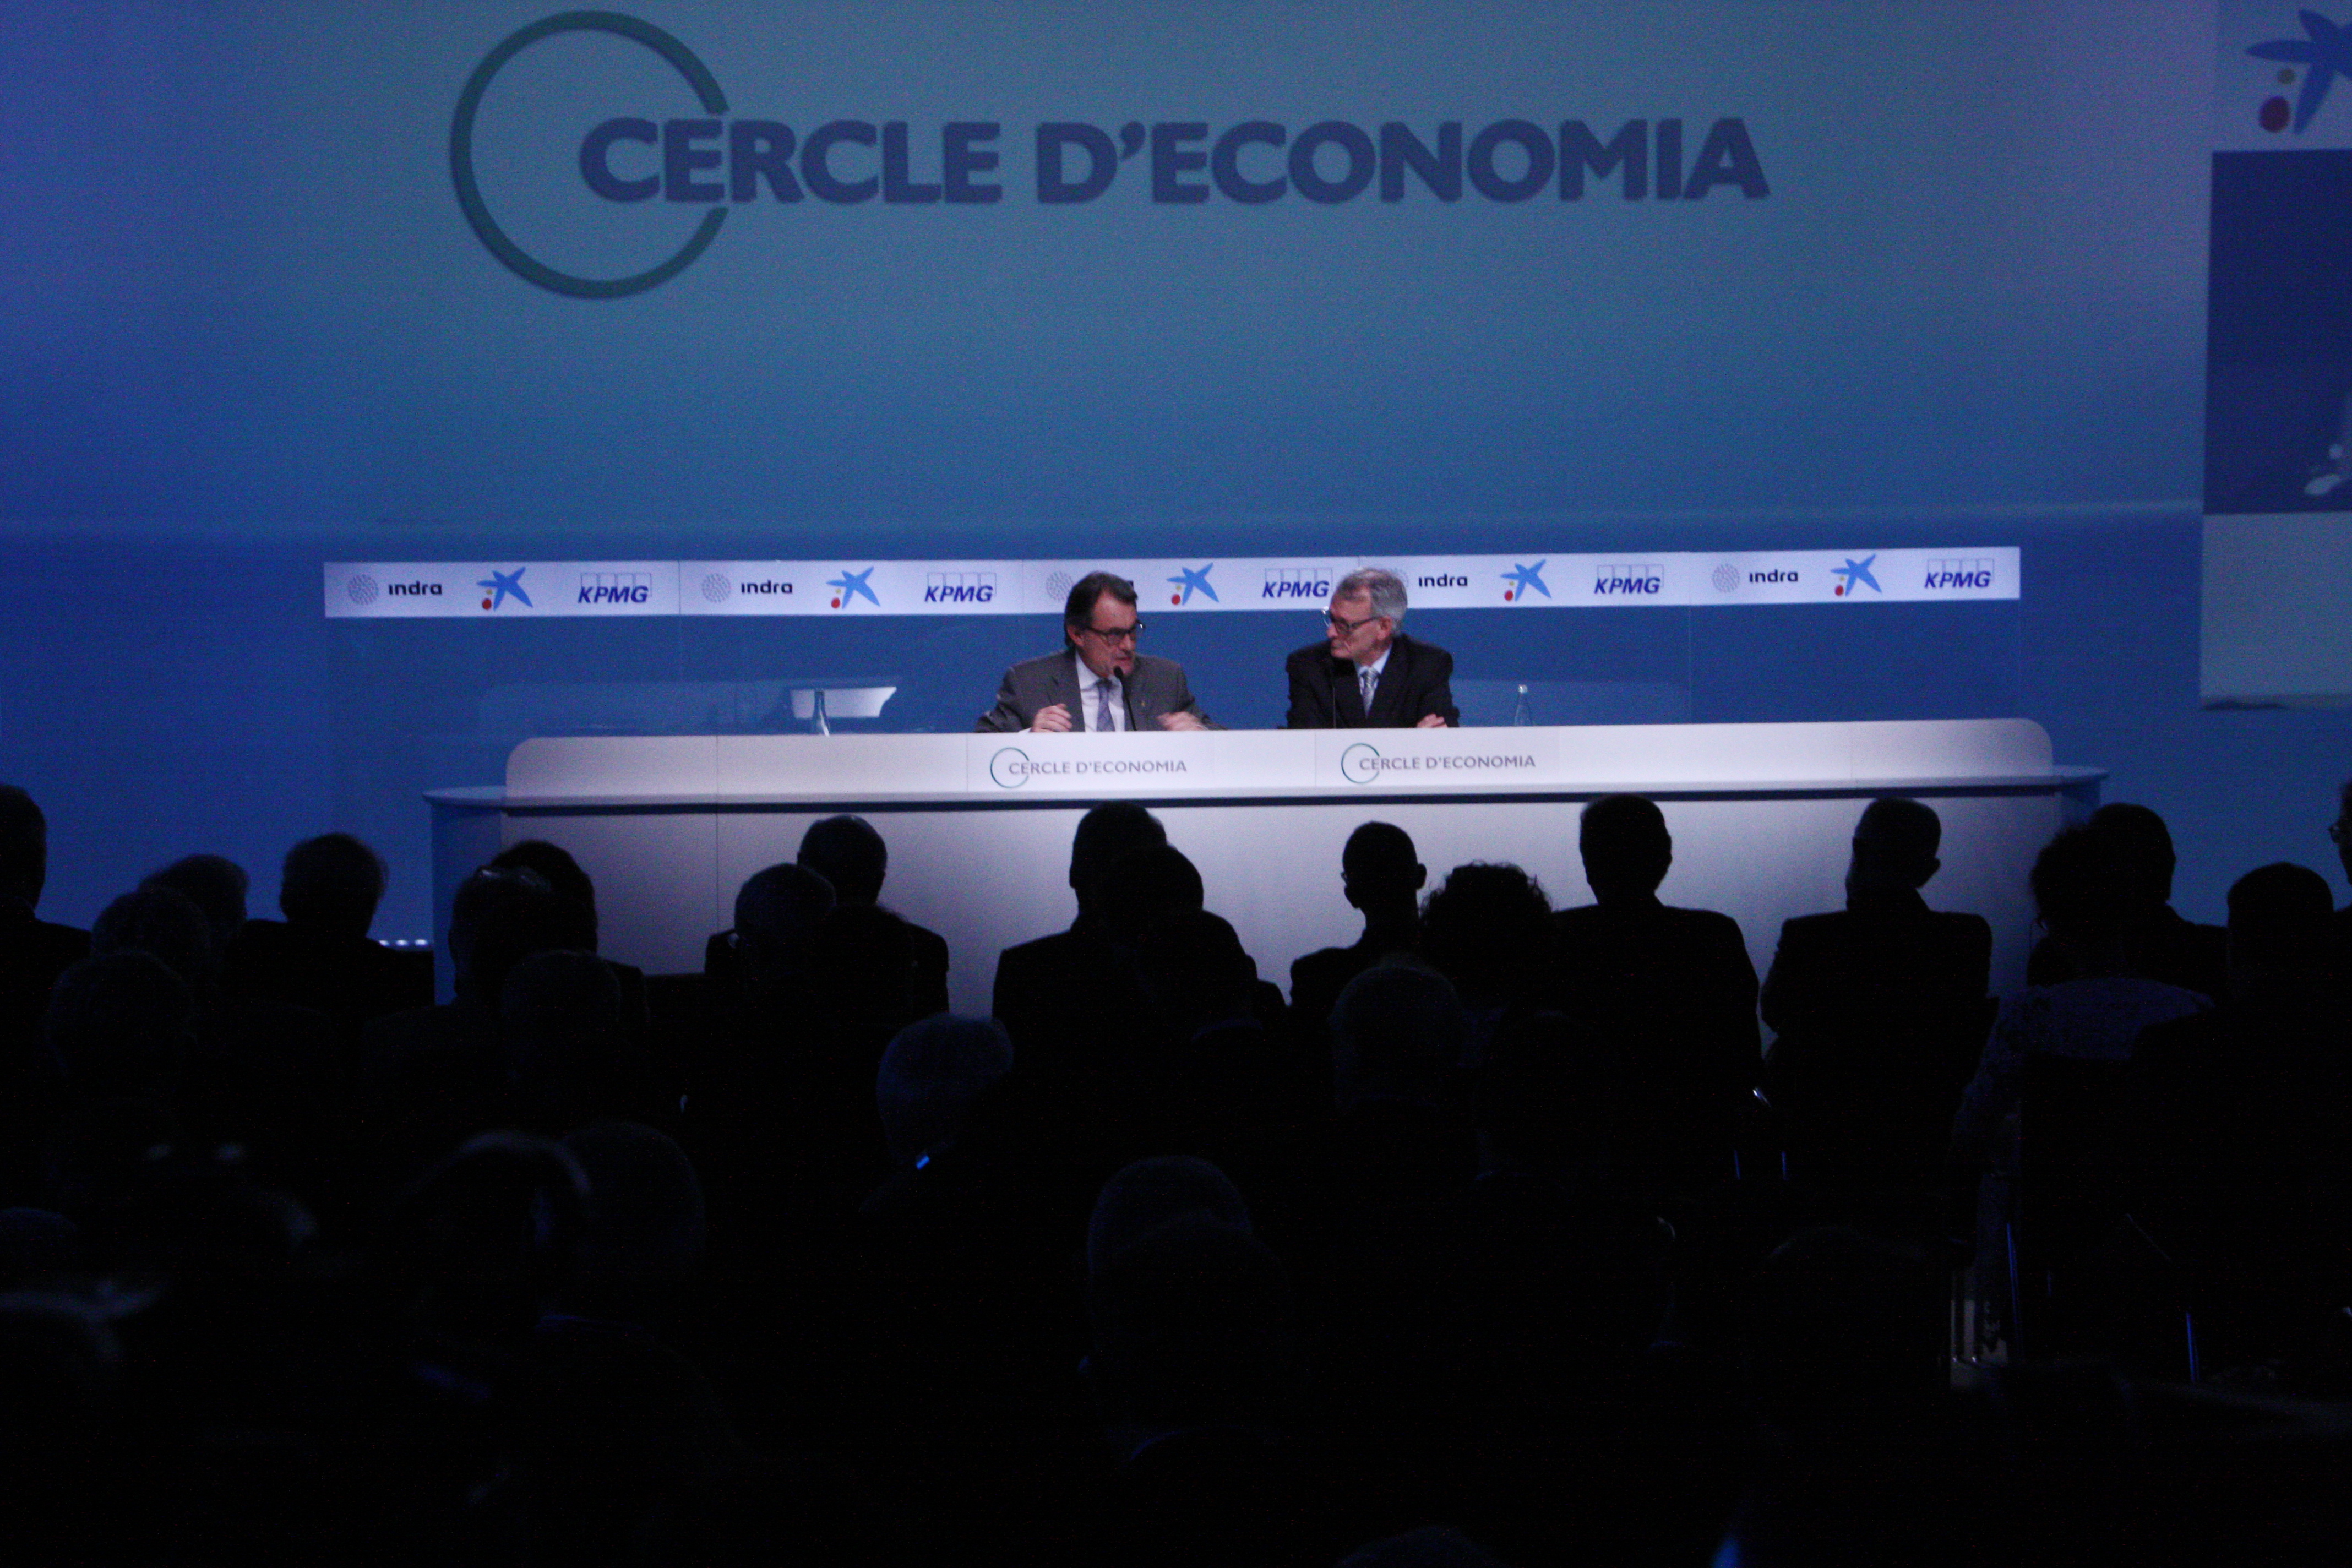 XXXI 'Cercle d'Economia' meeting, in May 2015 (by ACN)